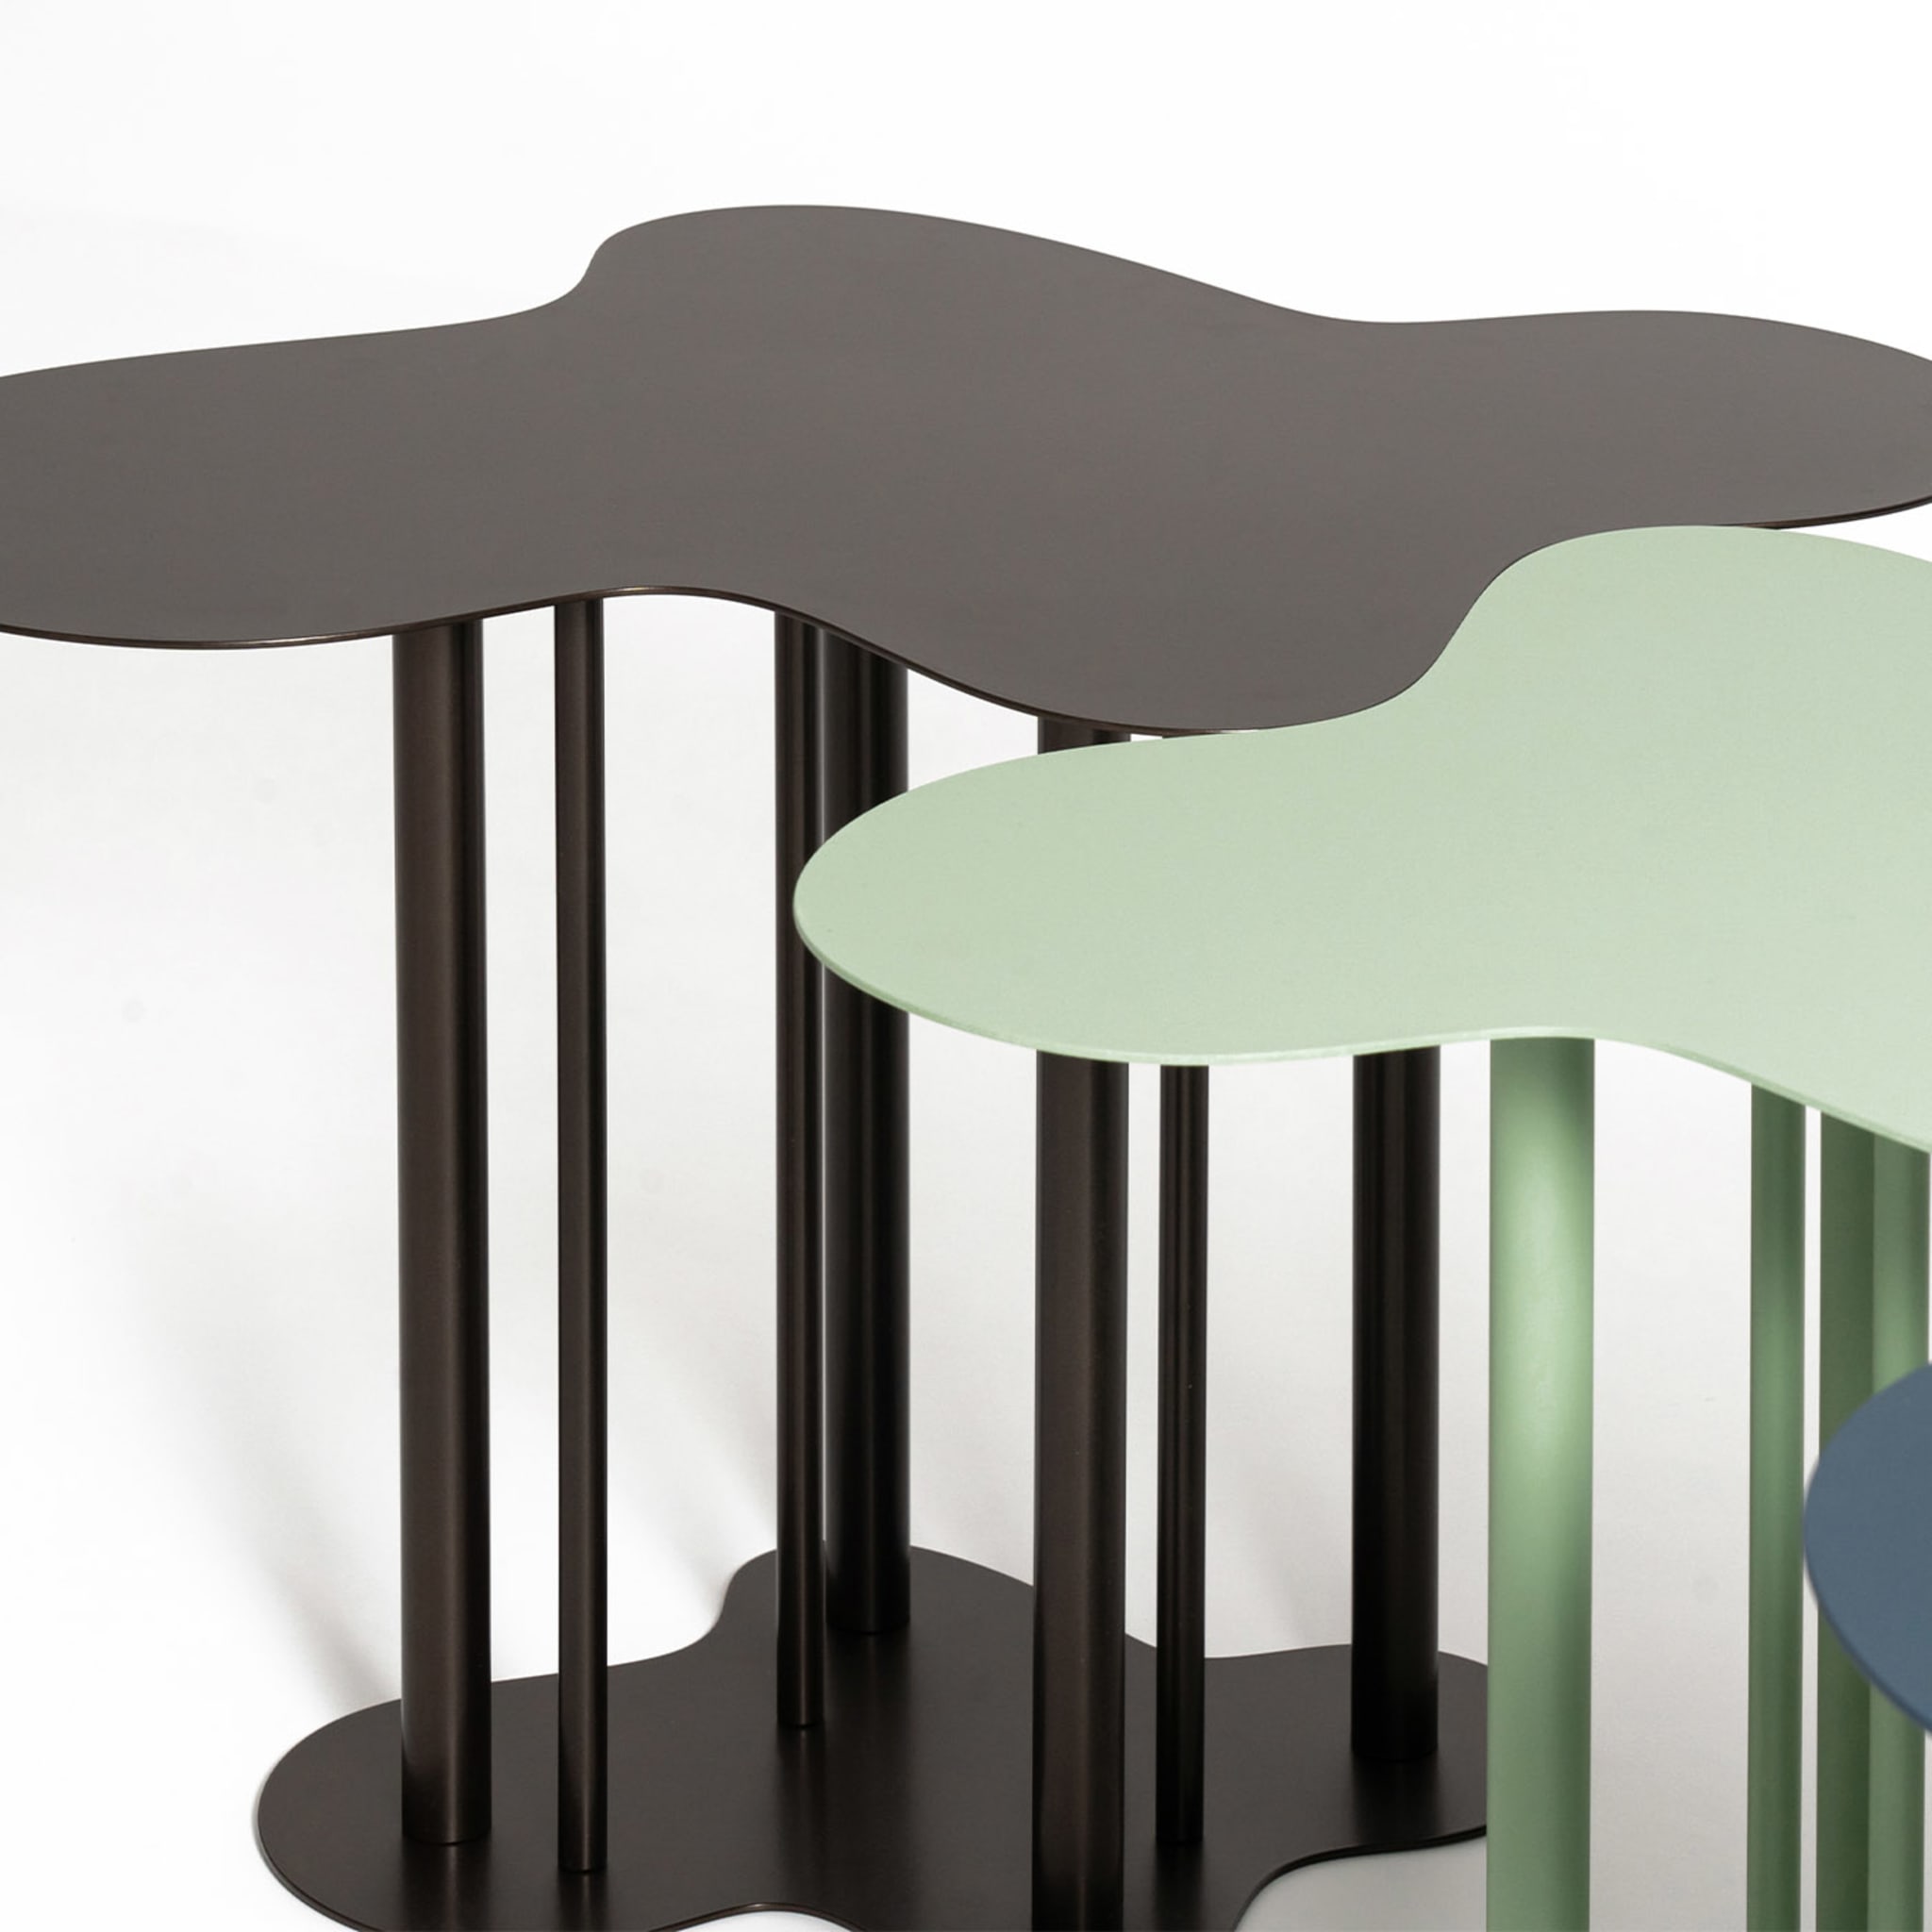 Nuvola 03 Pale Green Side Table by Mario Cucinella - Alternative view 2